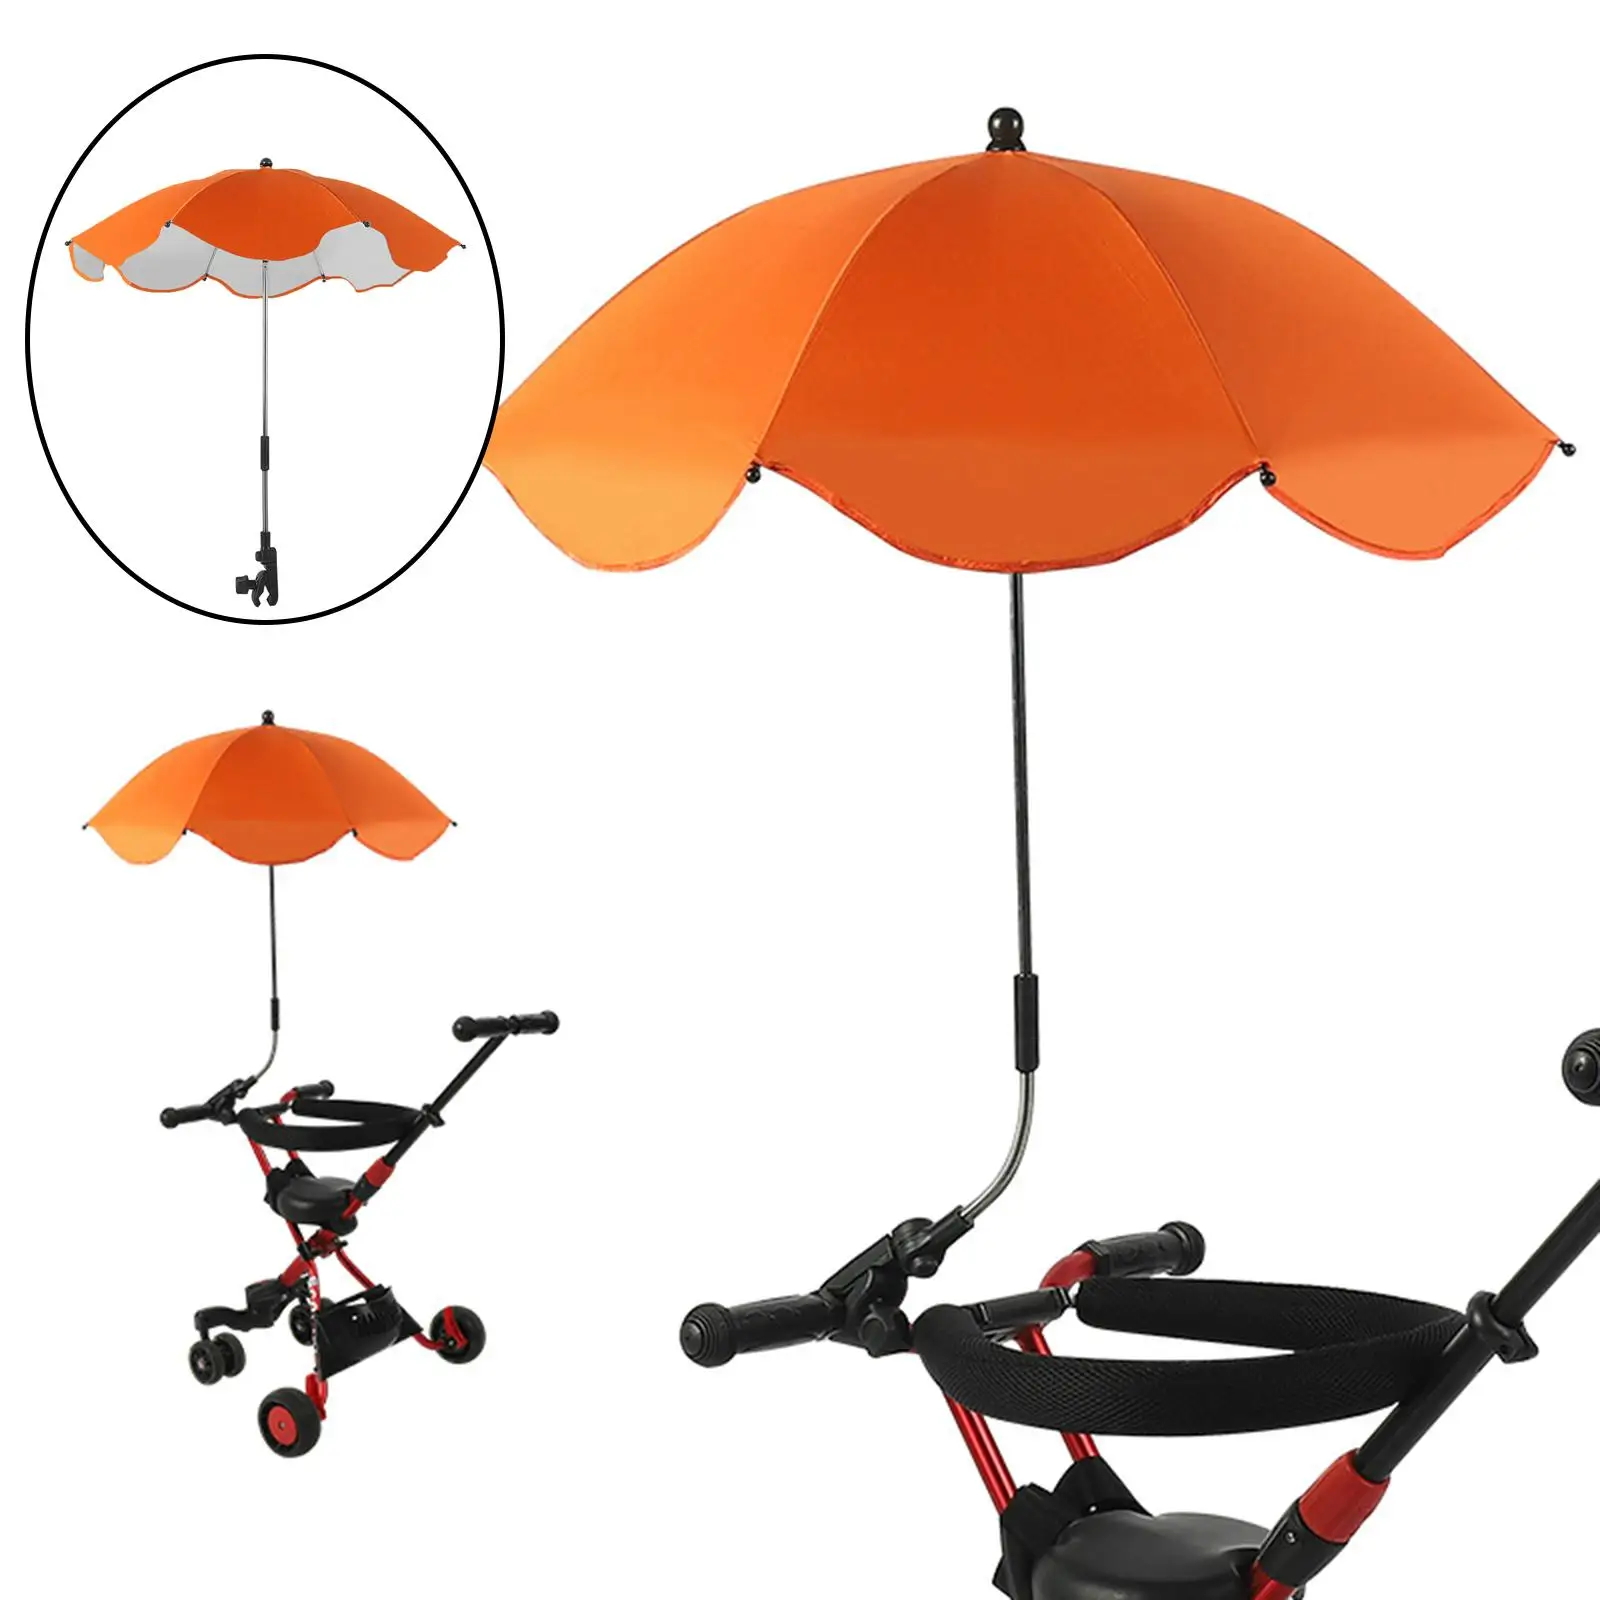 Clamp On UV Protection Baby Stroller Umbrella Buggy Pram Pushchair Accessories Large Parasol Rain Protecter Canopy Cover